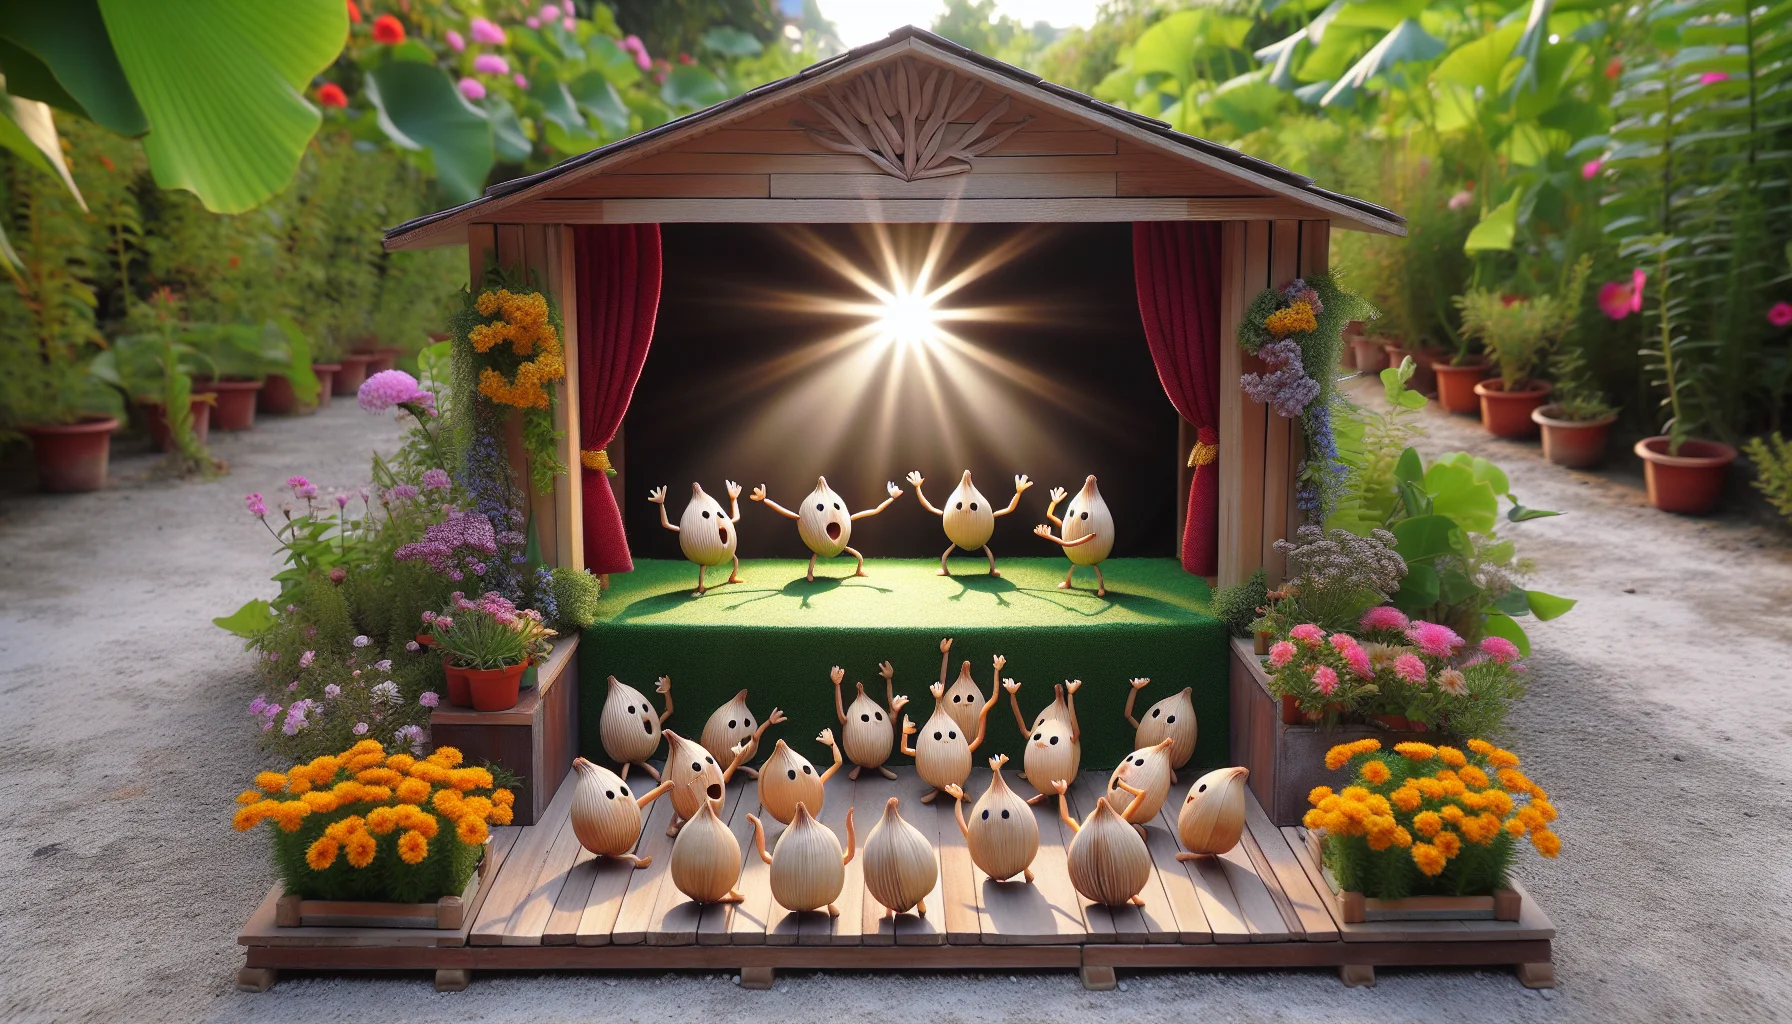 Create an amusing, realistic scene showcasing ginkgo seeds dramatizing a theatrical performance on a small stage built in a garden. Surround the stage with various flowers and plants providing a vibrant backdrop. The ginkgo seeds are anthropomorphized with tiny faces and hands, gesturing dramatically as they put on a lively show about the joys and benefits of gardening. Some seeds could be actors while others form the enthusiastic audience. Have a bright sun directly above illuminating the stage while the rest of the garden is subtly lit, further emphasizing the stage and the performance.